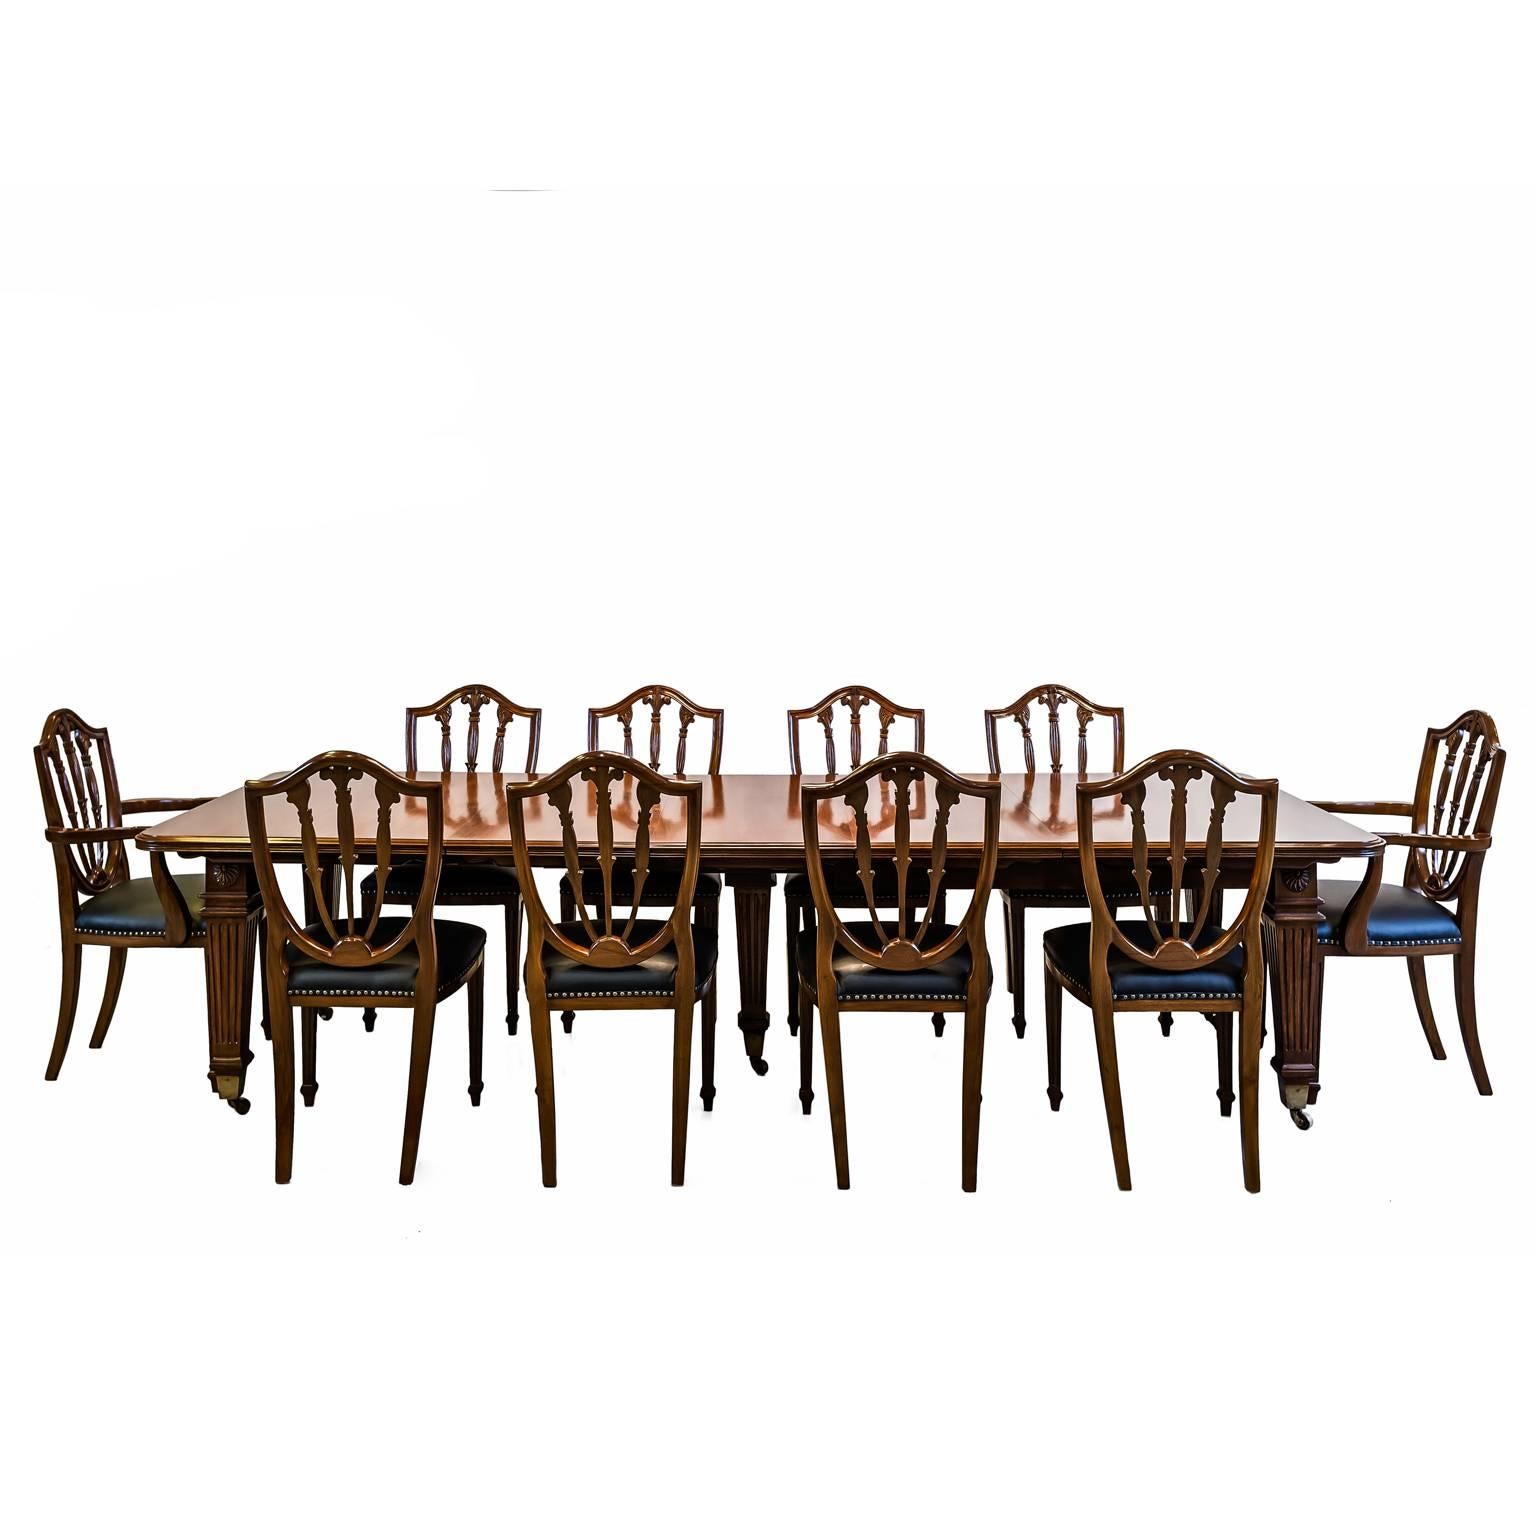 Anglo-Indian or British Colonial Teakwood Extending Dining Table with Ten Chairs